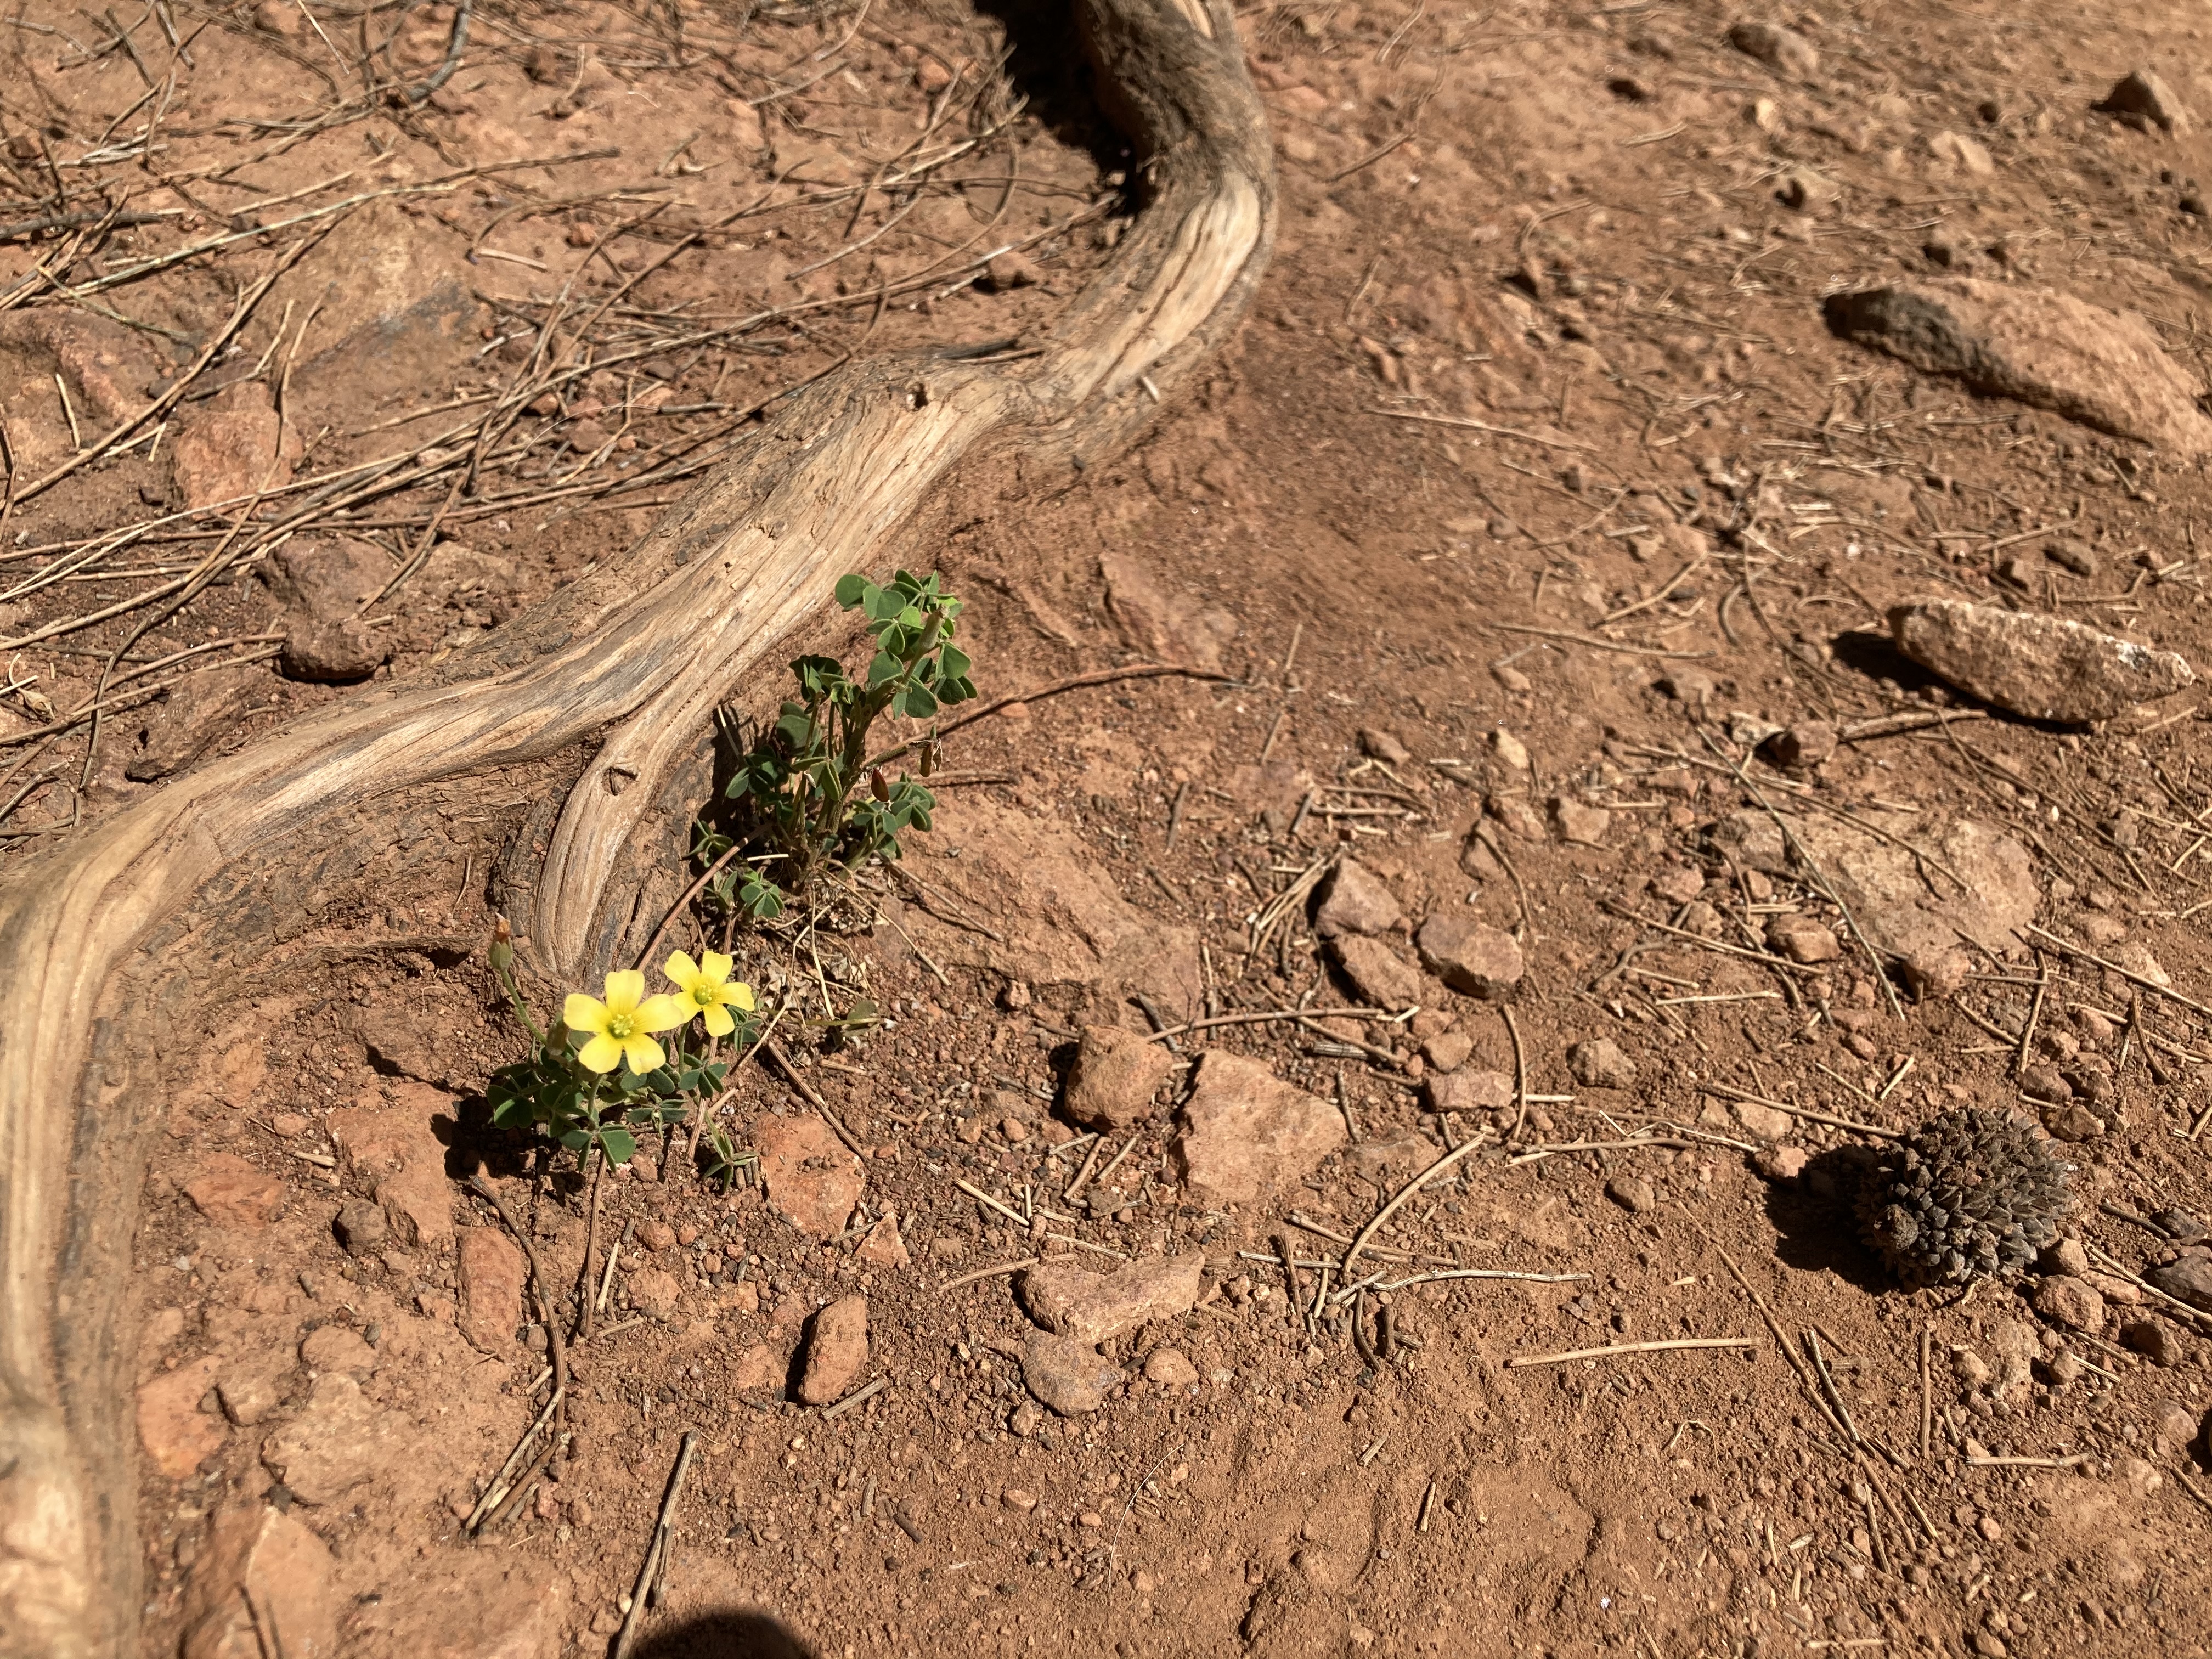 A small yellow flower, by a tree root, in a patch of rocky, red dirt